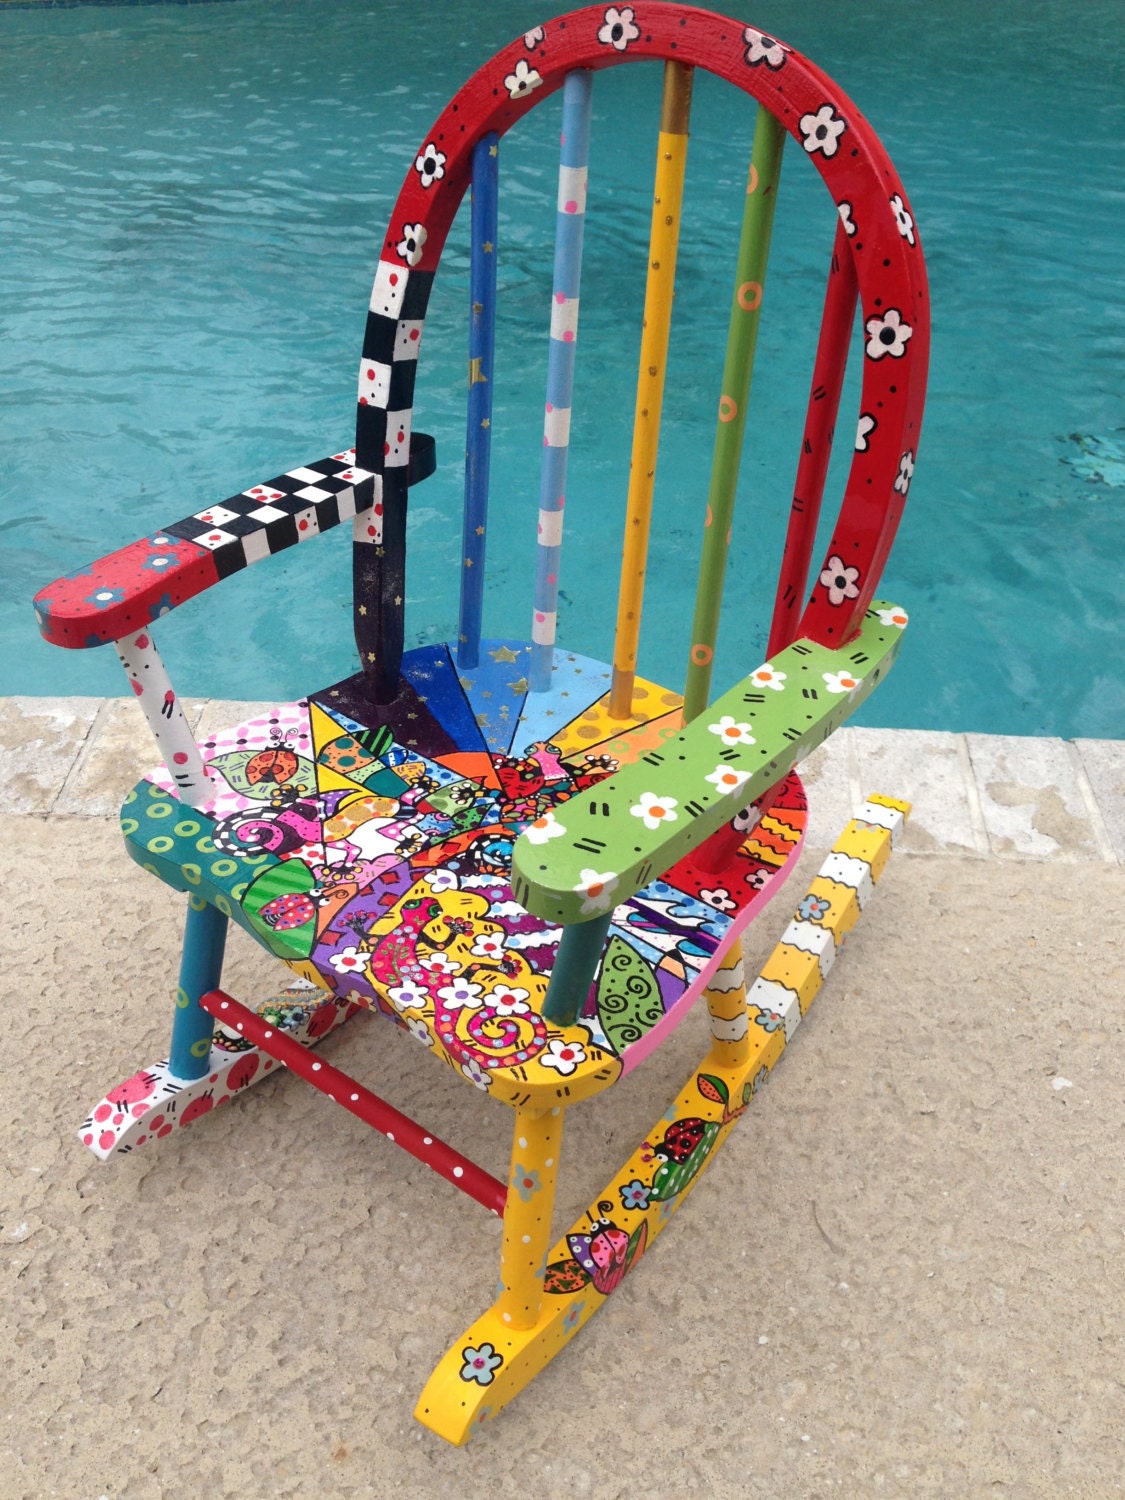 SALE Hand painted kids rocking chair Whimsical painted